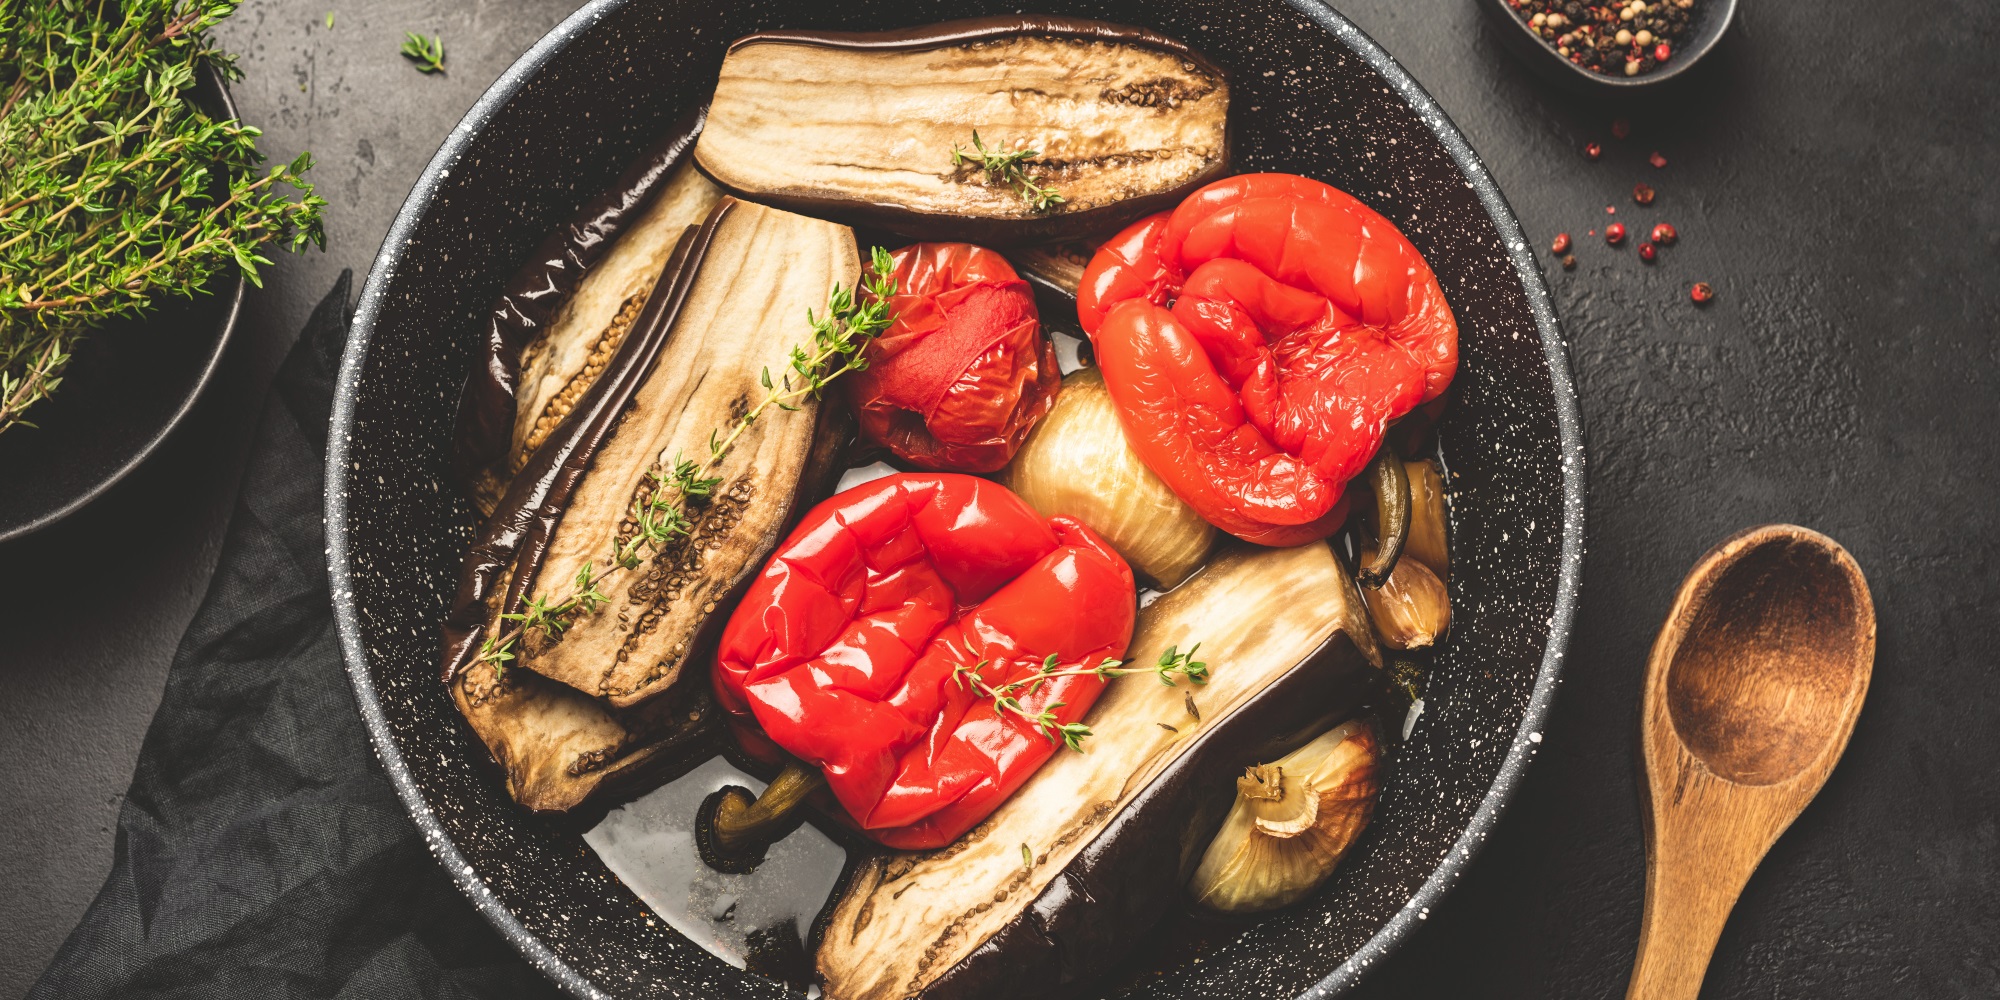 Roasted peppers, baked eggplant, tomatoes, red onion and parsley